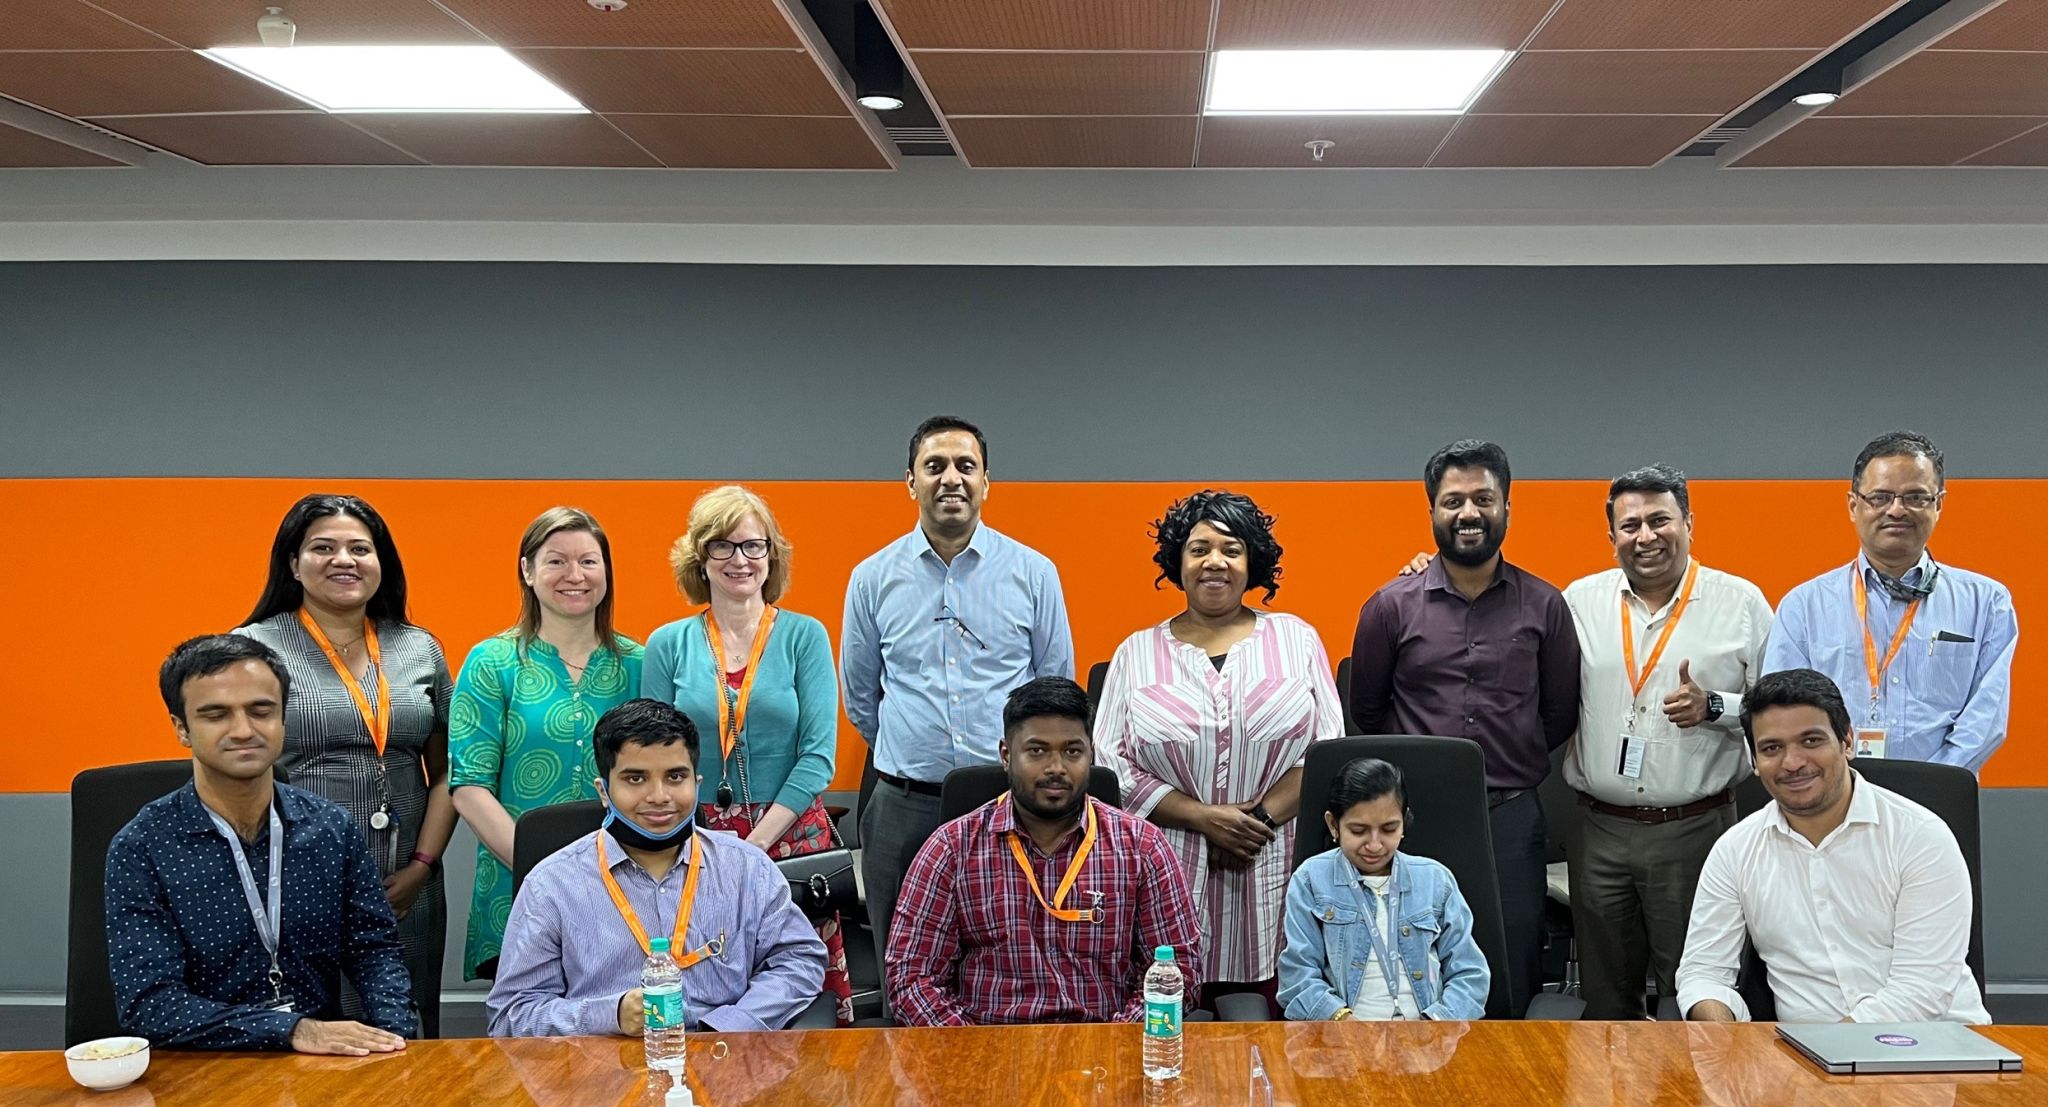 Participants in our Autism Spectrum internship sitting at a table in our India office posing for a group photo with several leaders.